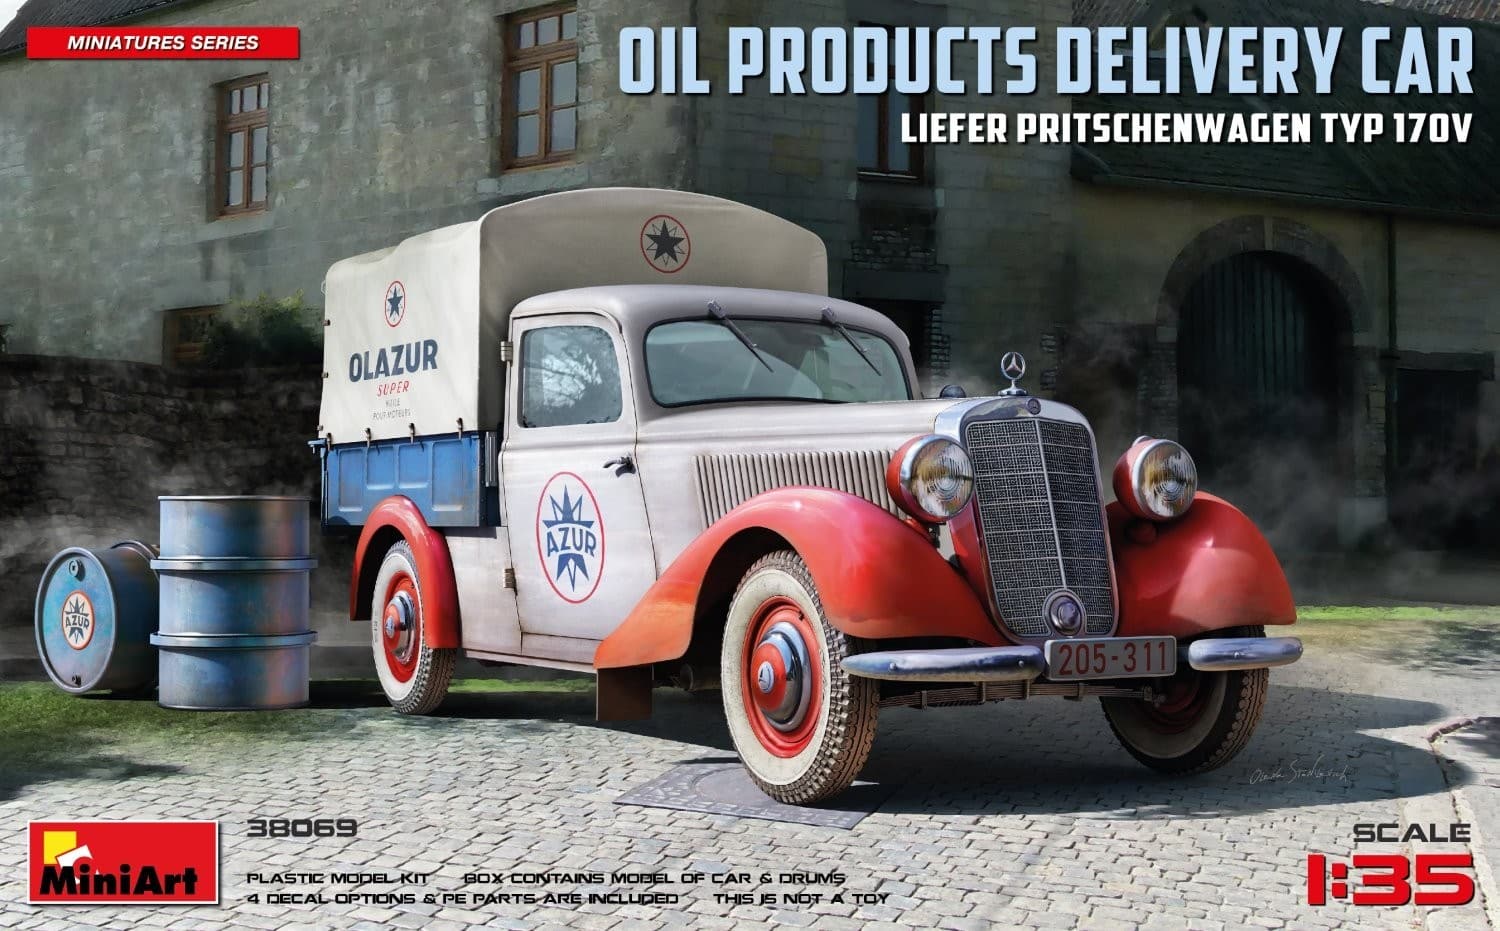 38069 OIL PRODUCTS DELIVERY CAR, LIEFER PRITSCHENWAGEN TYP 170V